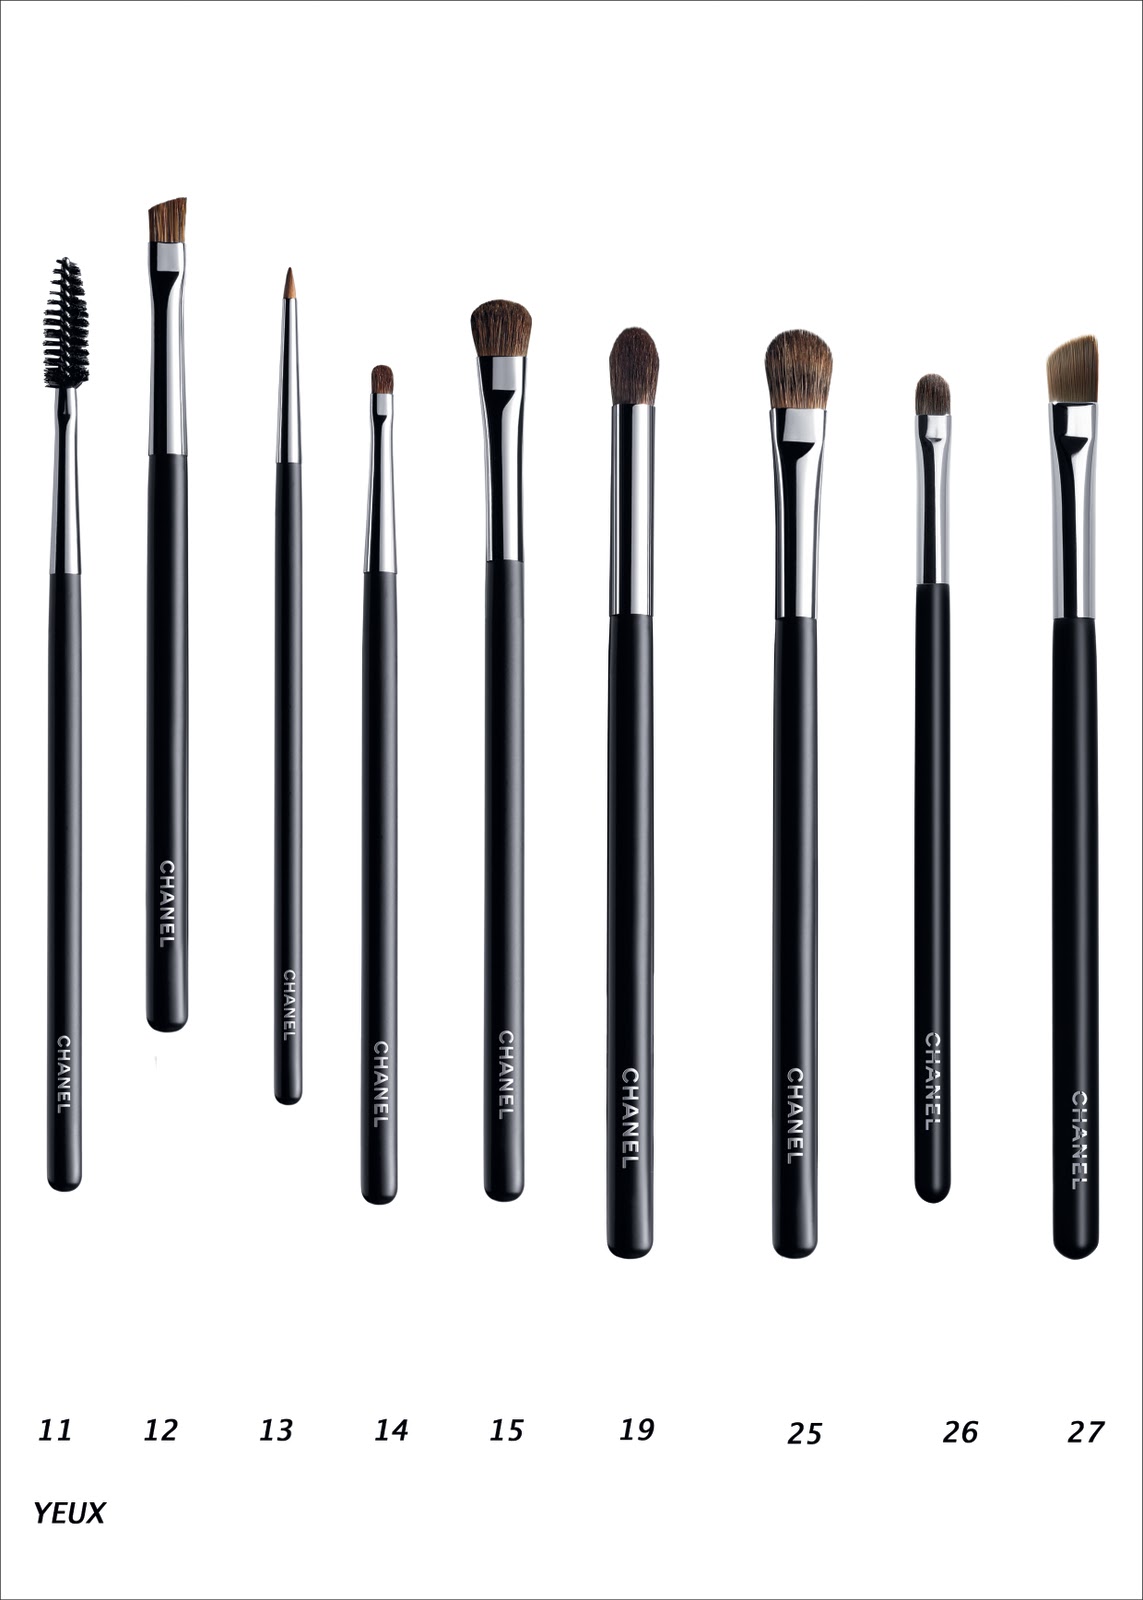 275, CHANEL MAKEUP BRUSHES